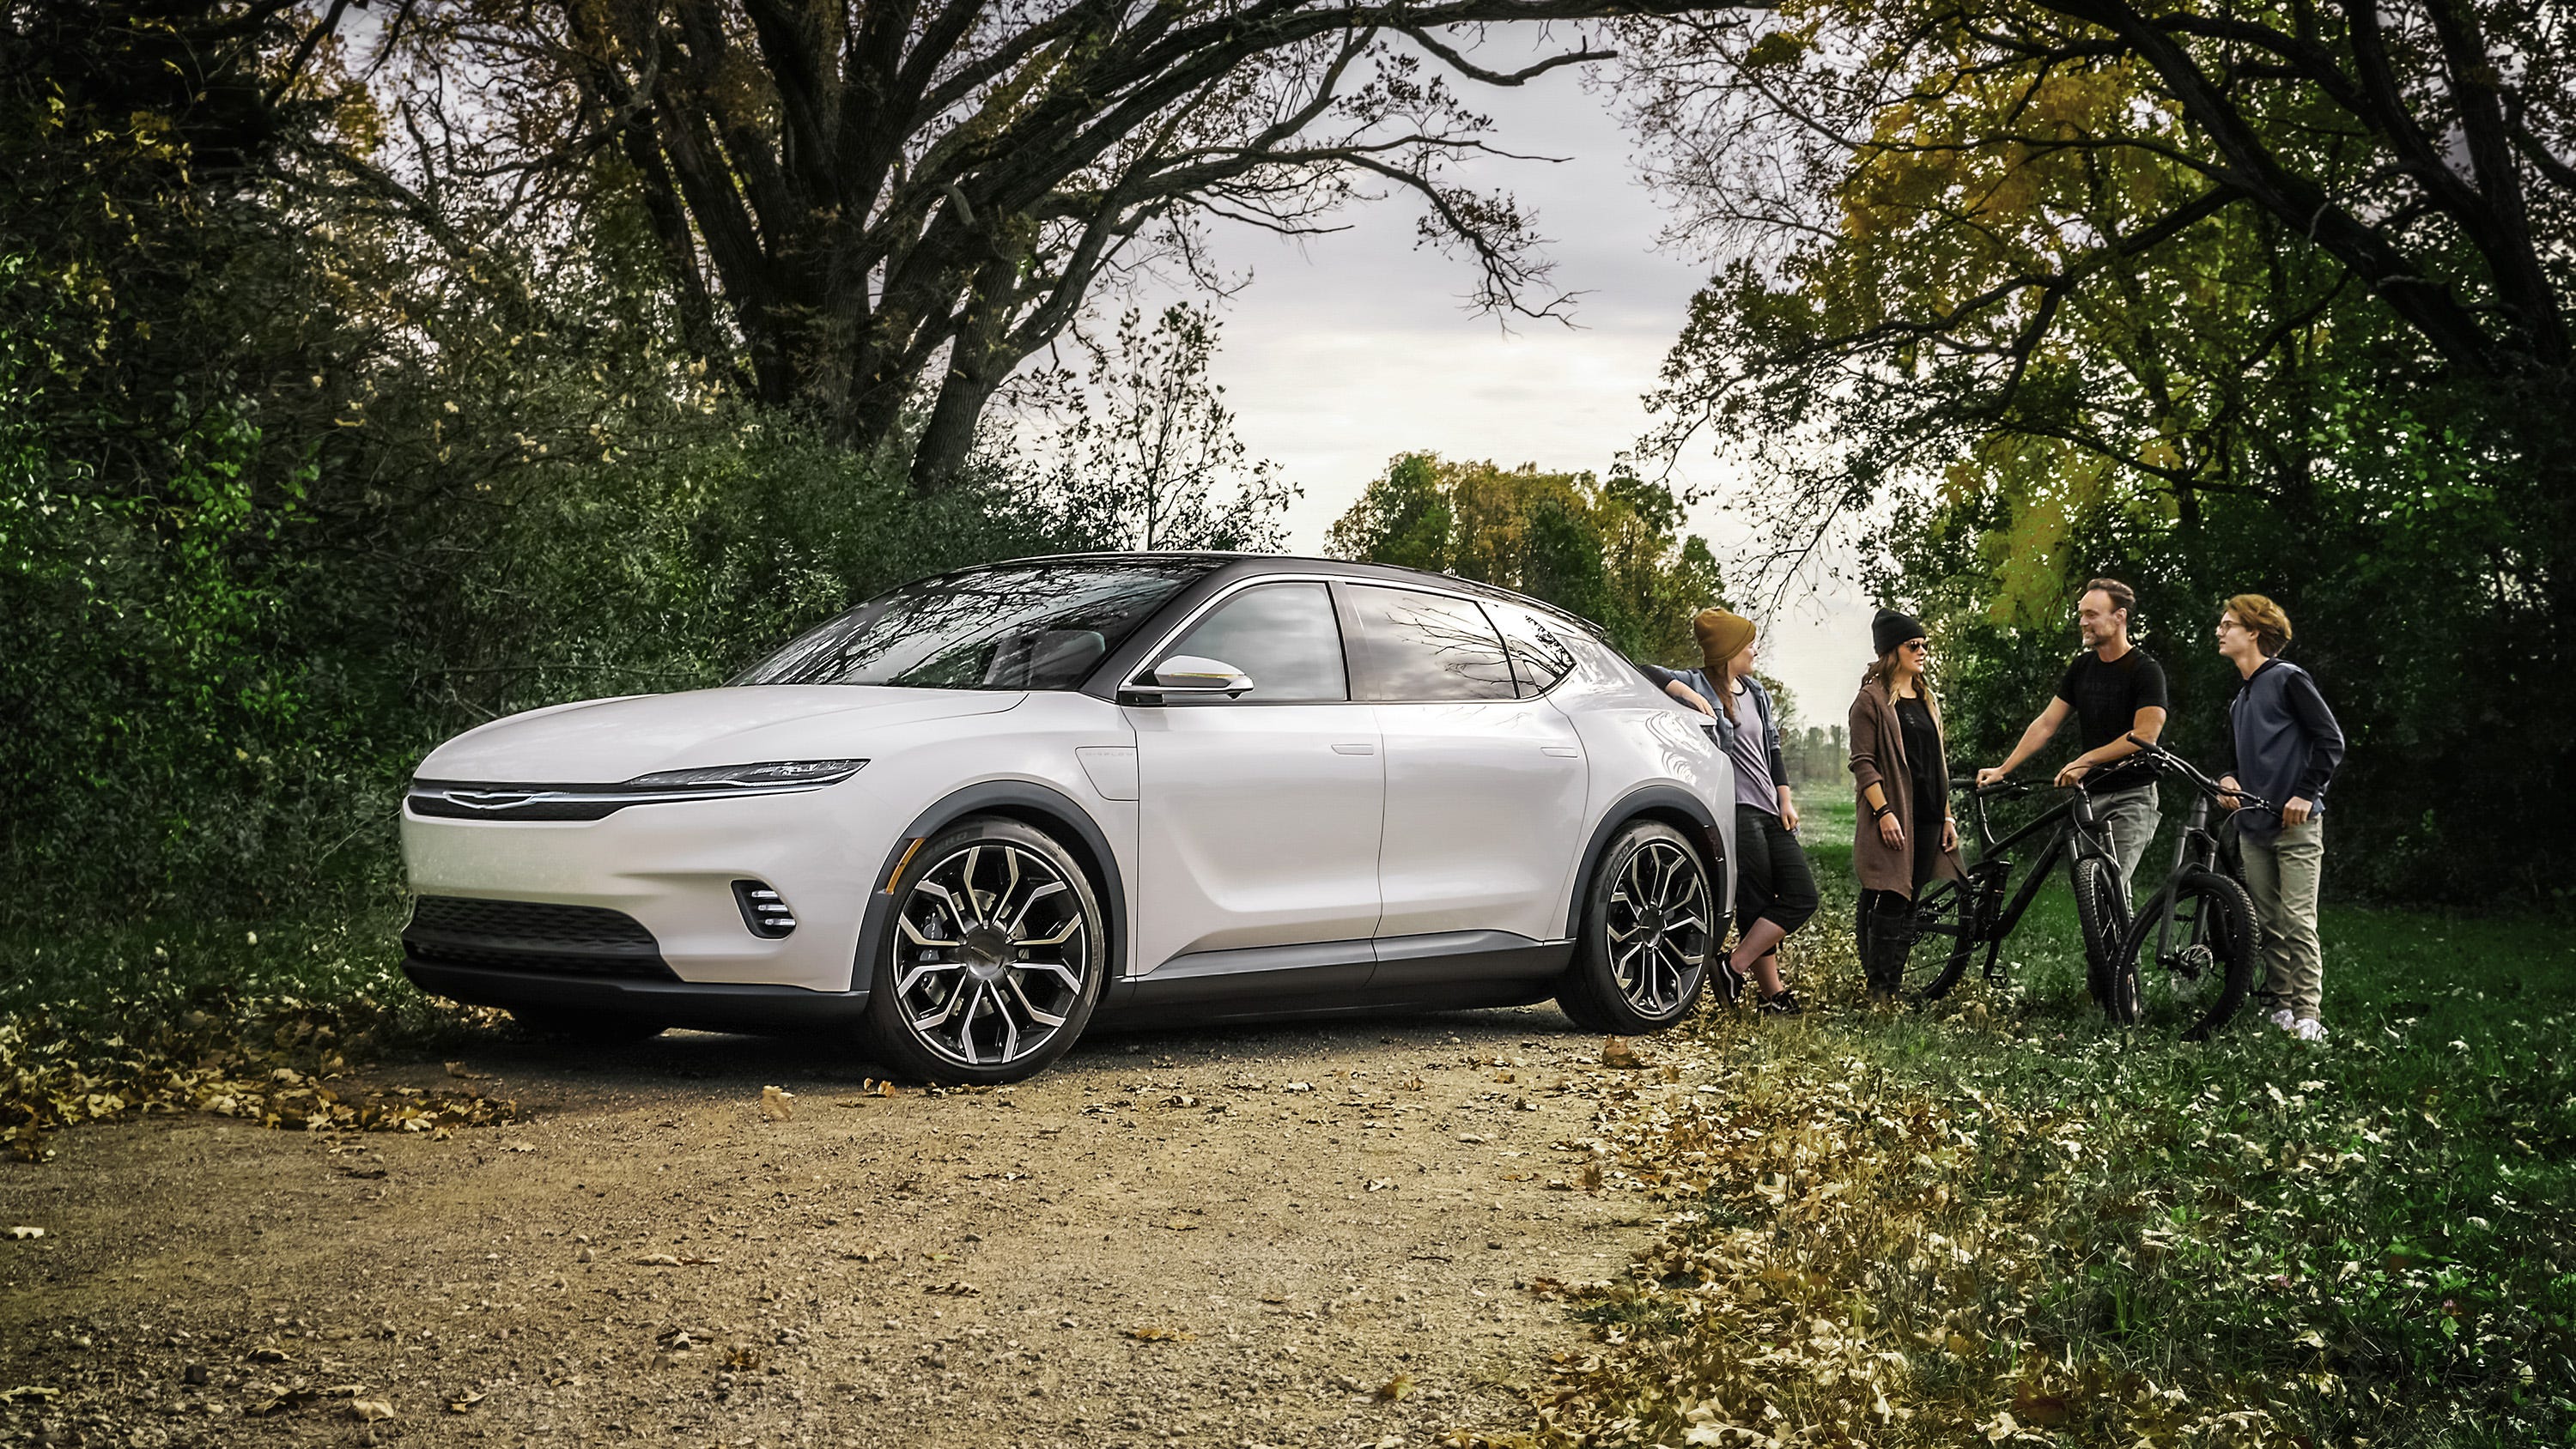 The Chrysler Airflow Concept features a dynamic design proportion, with a low ride height and streamlined, two-tone roof line that achieves an elegant yet athletic profile.